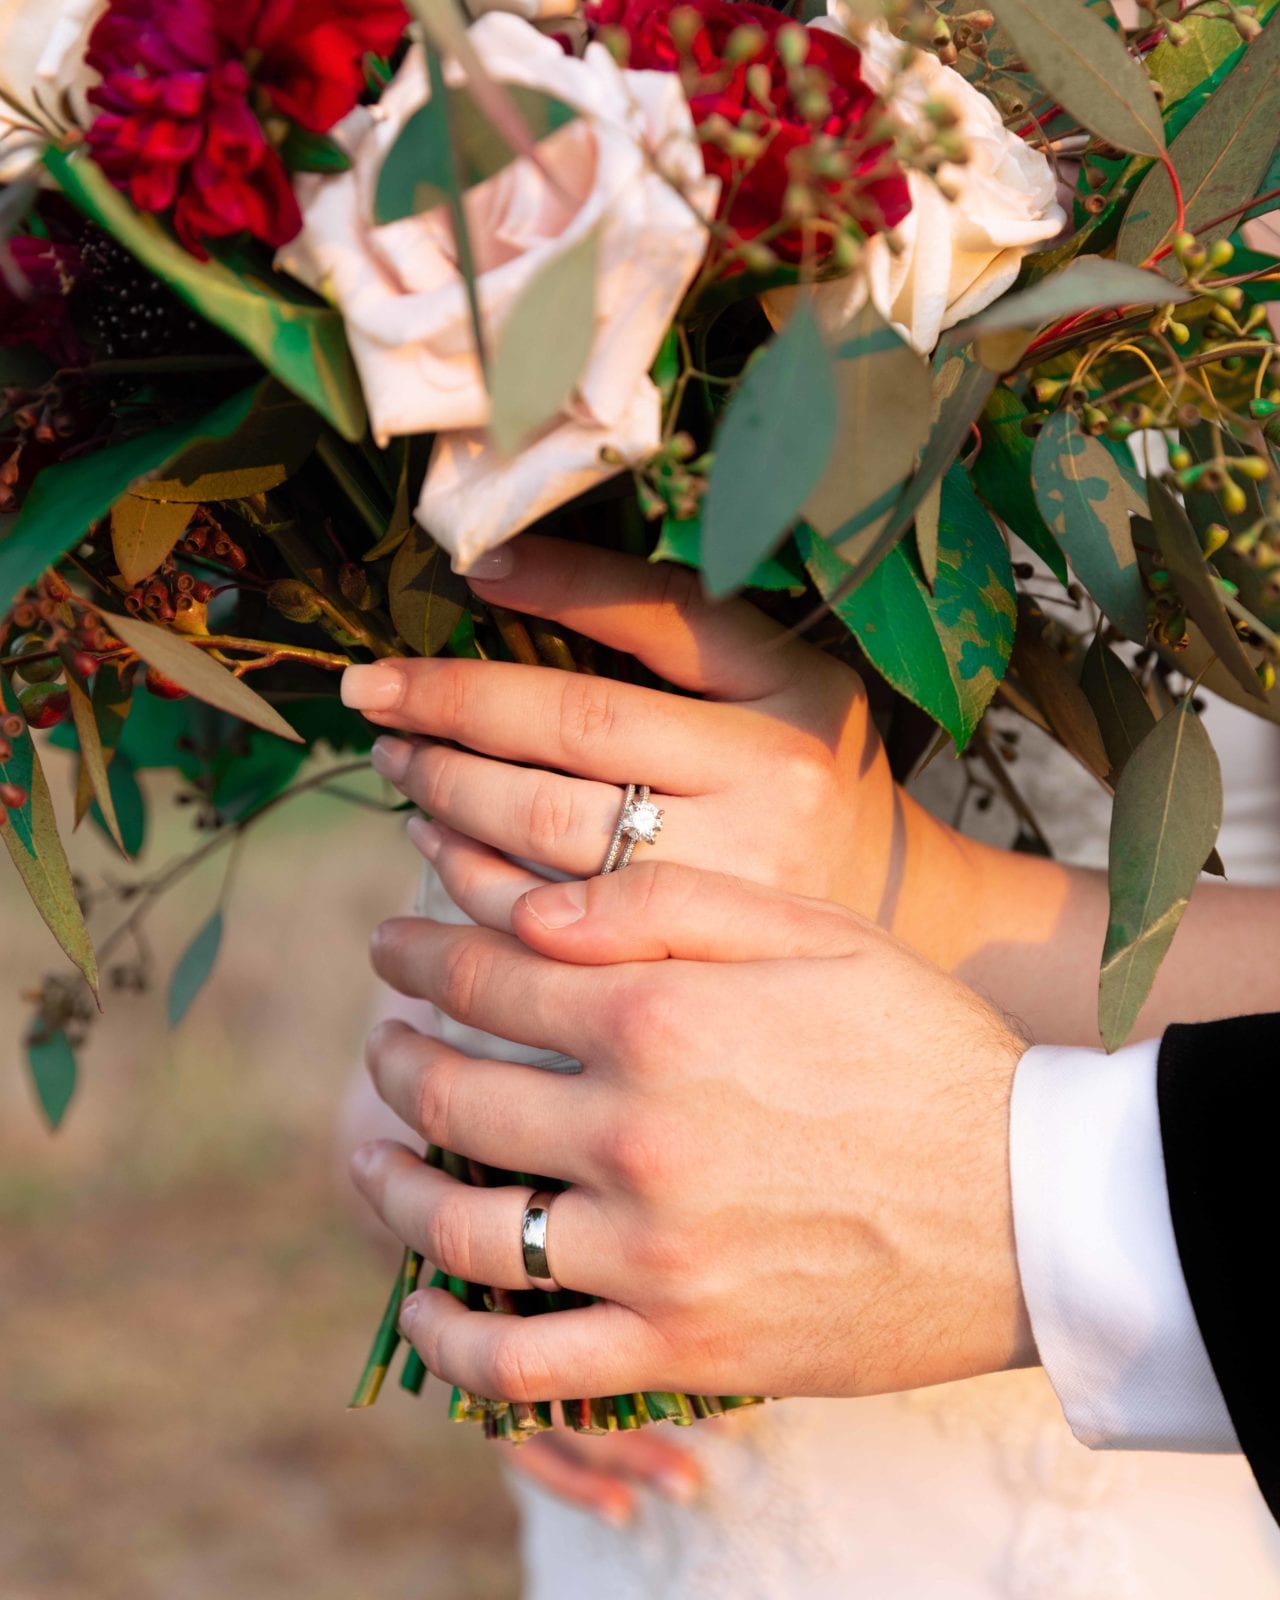 Wedding bouquet with bride and groom's hands showing off wedding rings